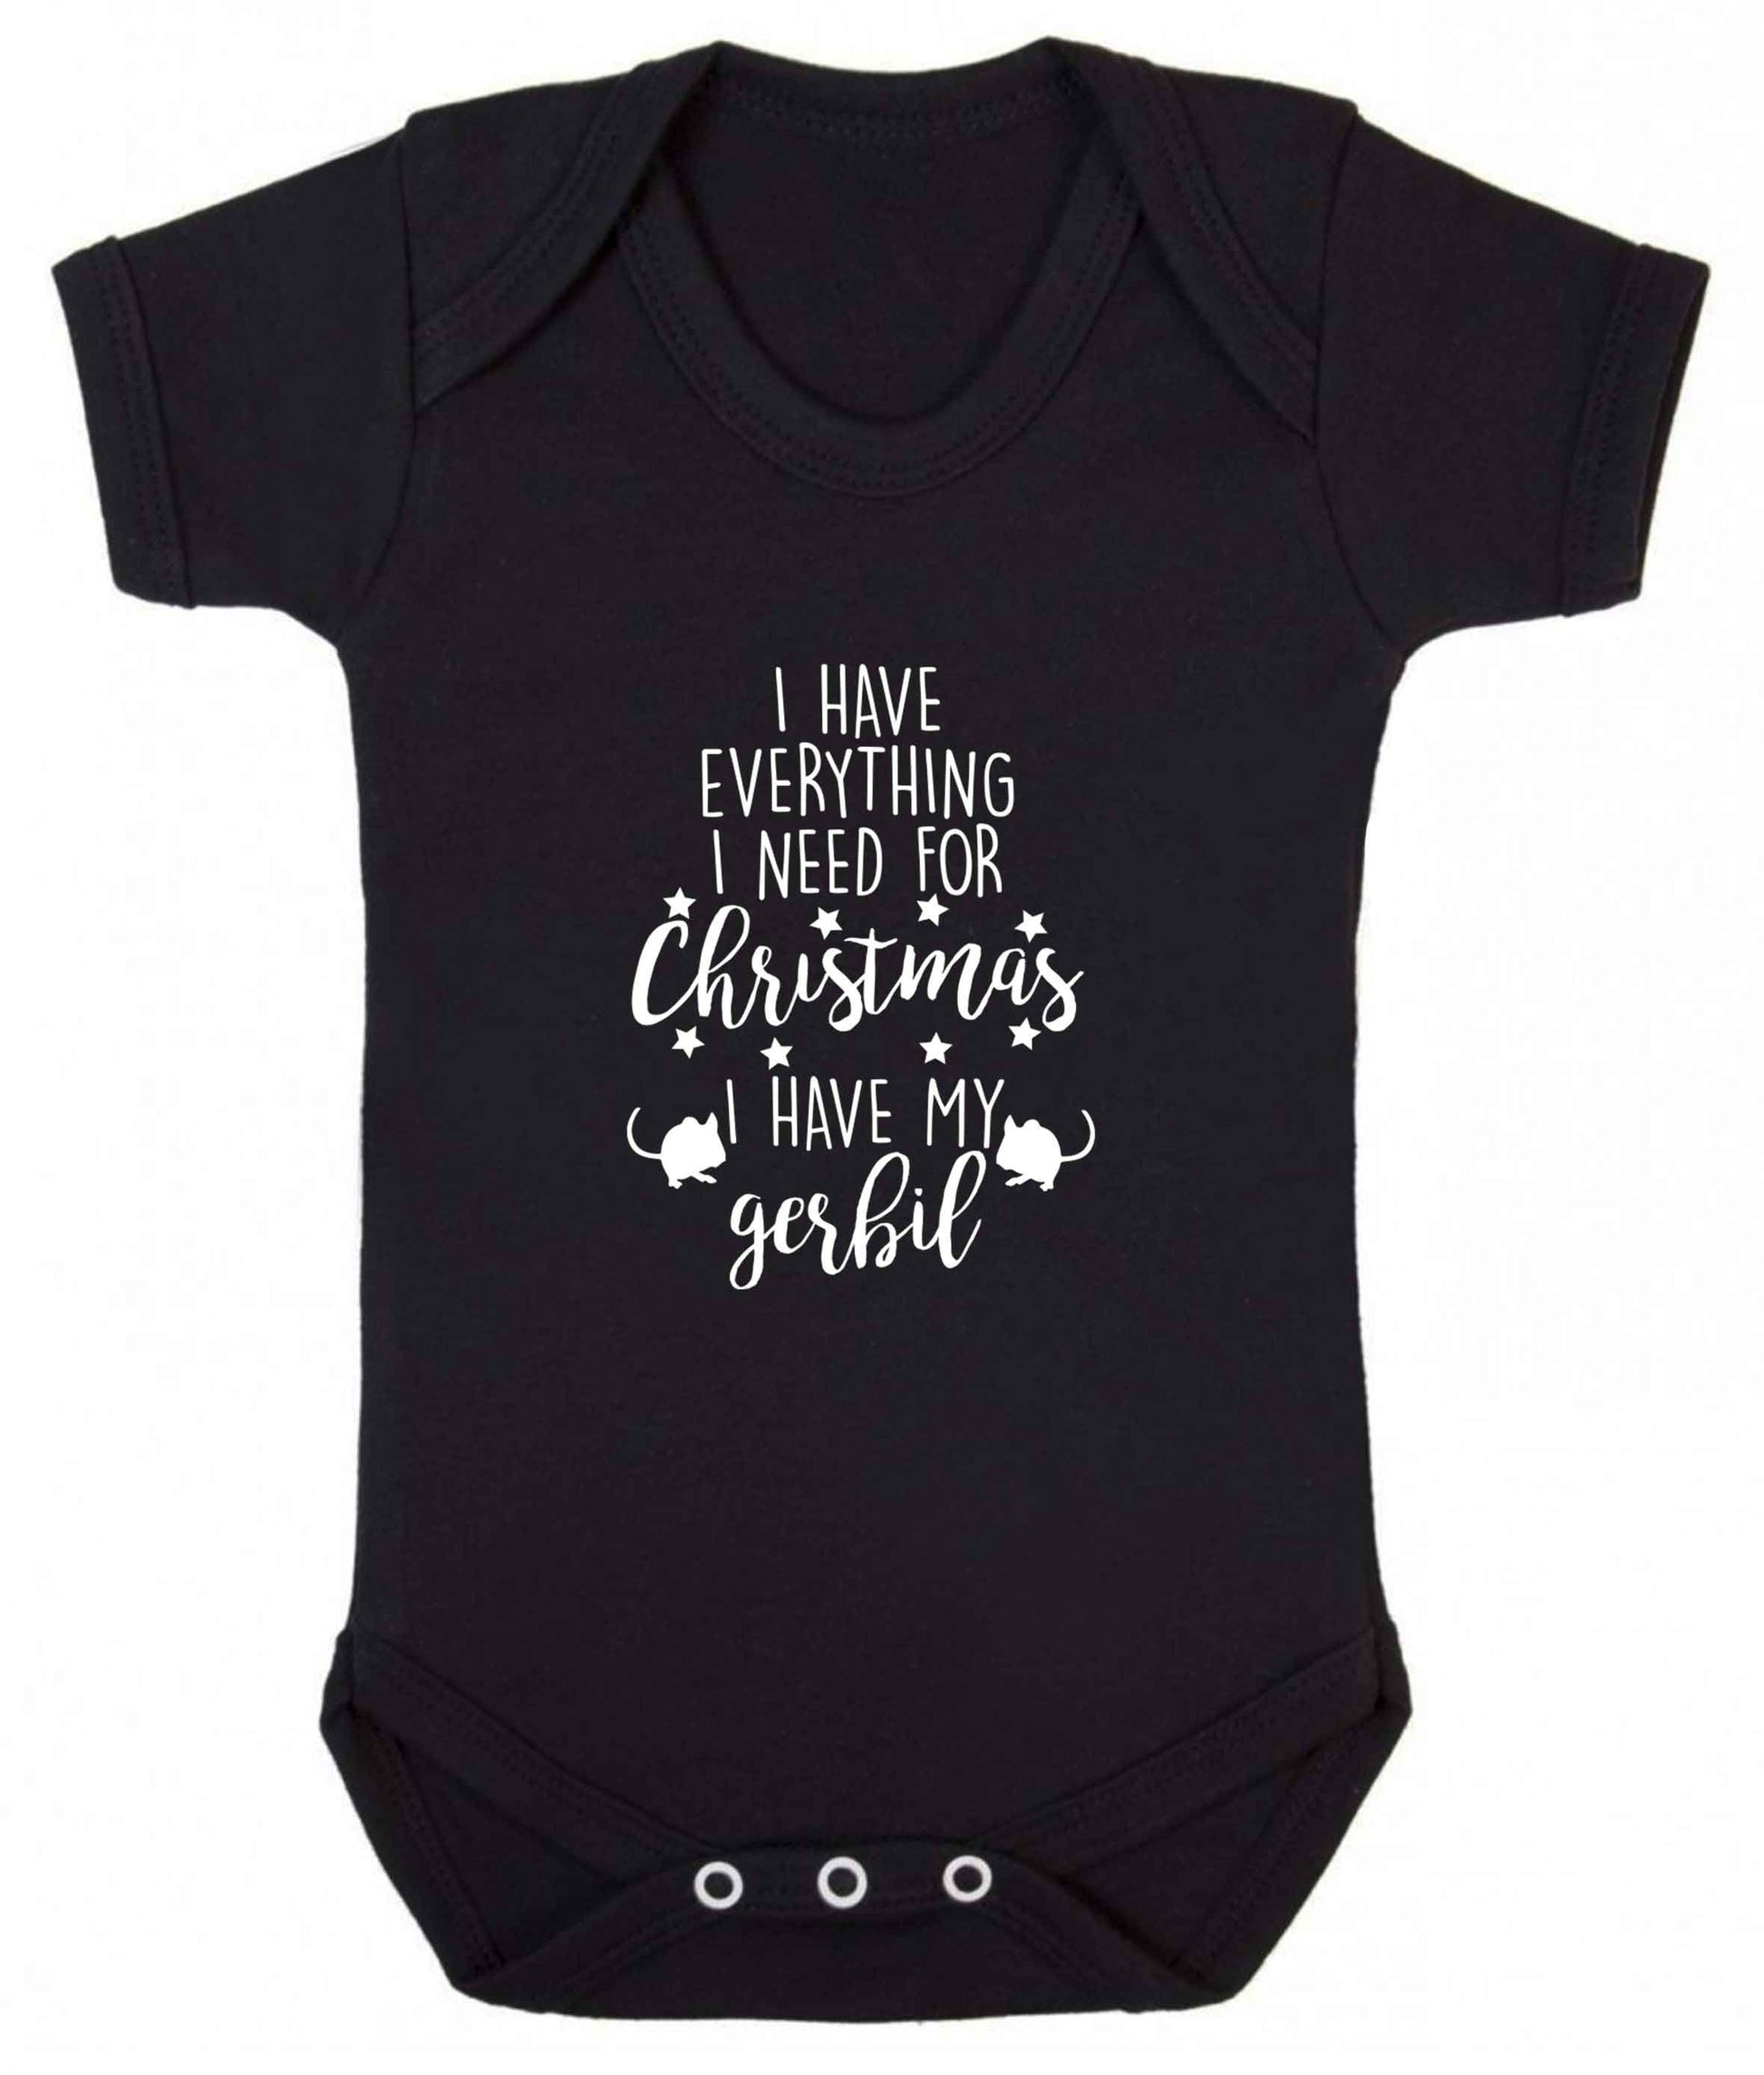 I have everything I need for Christmas I have my gerbil baby vest black 18-24 months